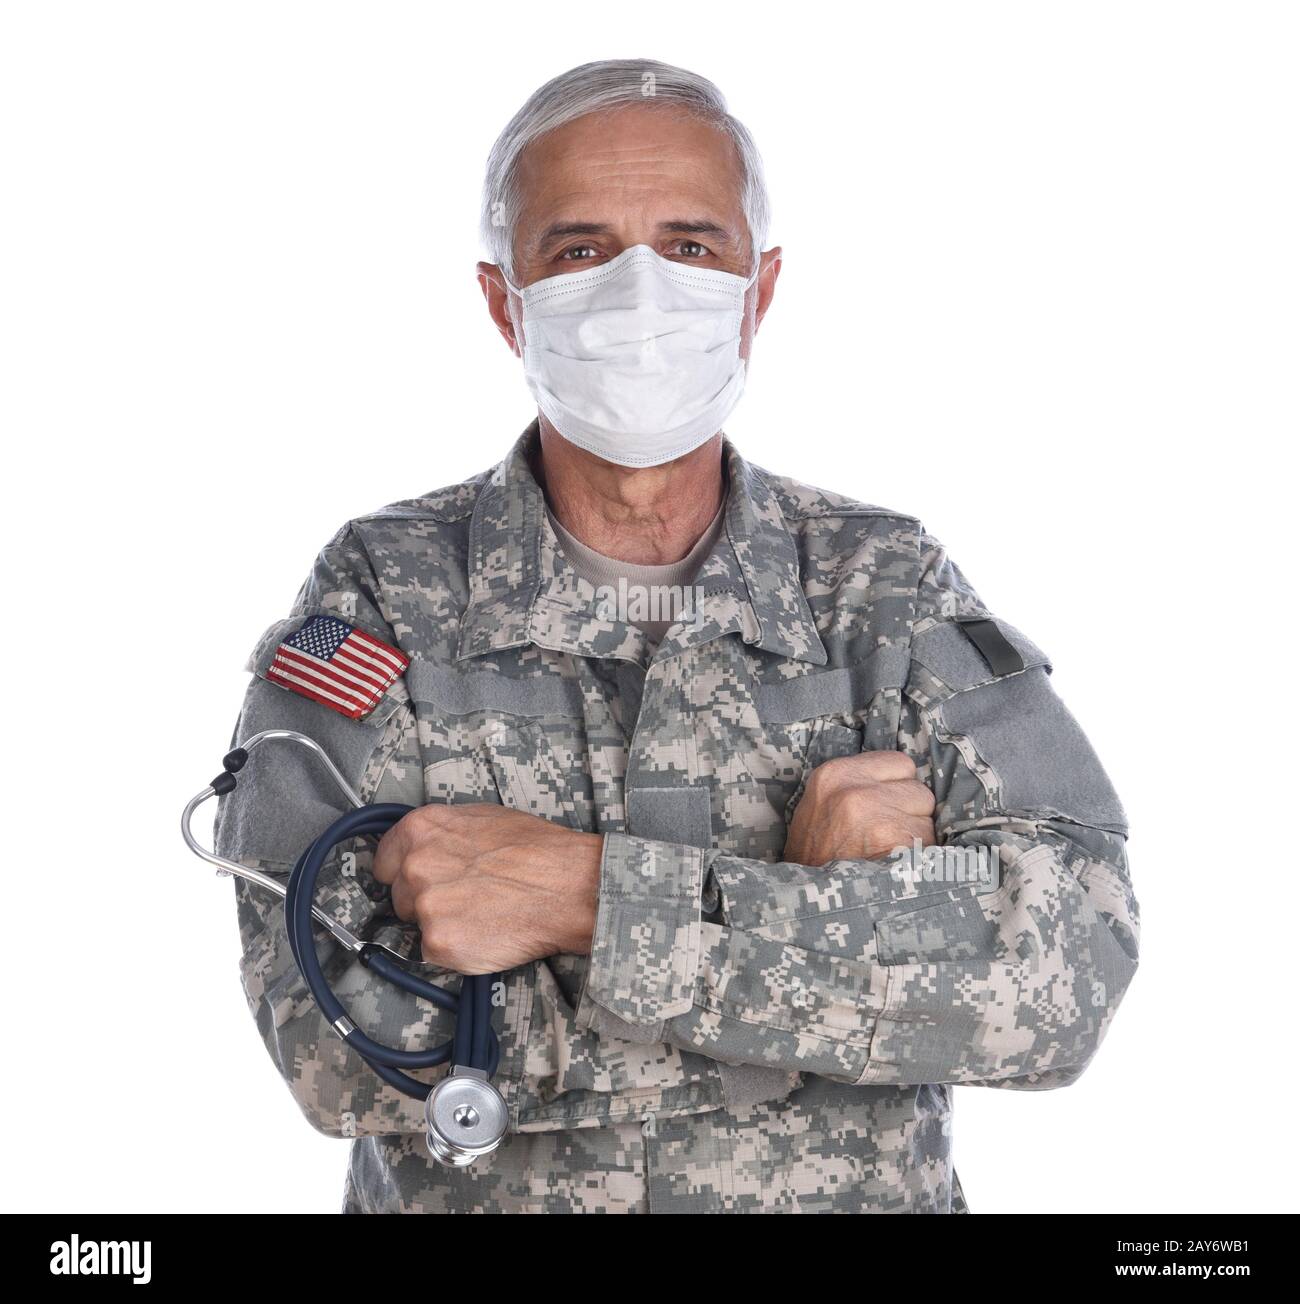 Military Health Care Concept. Military doctor with his arms folded wearing camoflague fatigues, surgical mask holding a stethoscope. Stock Photo